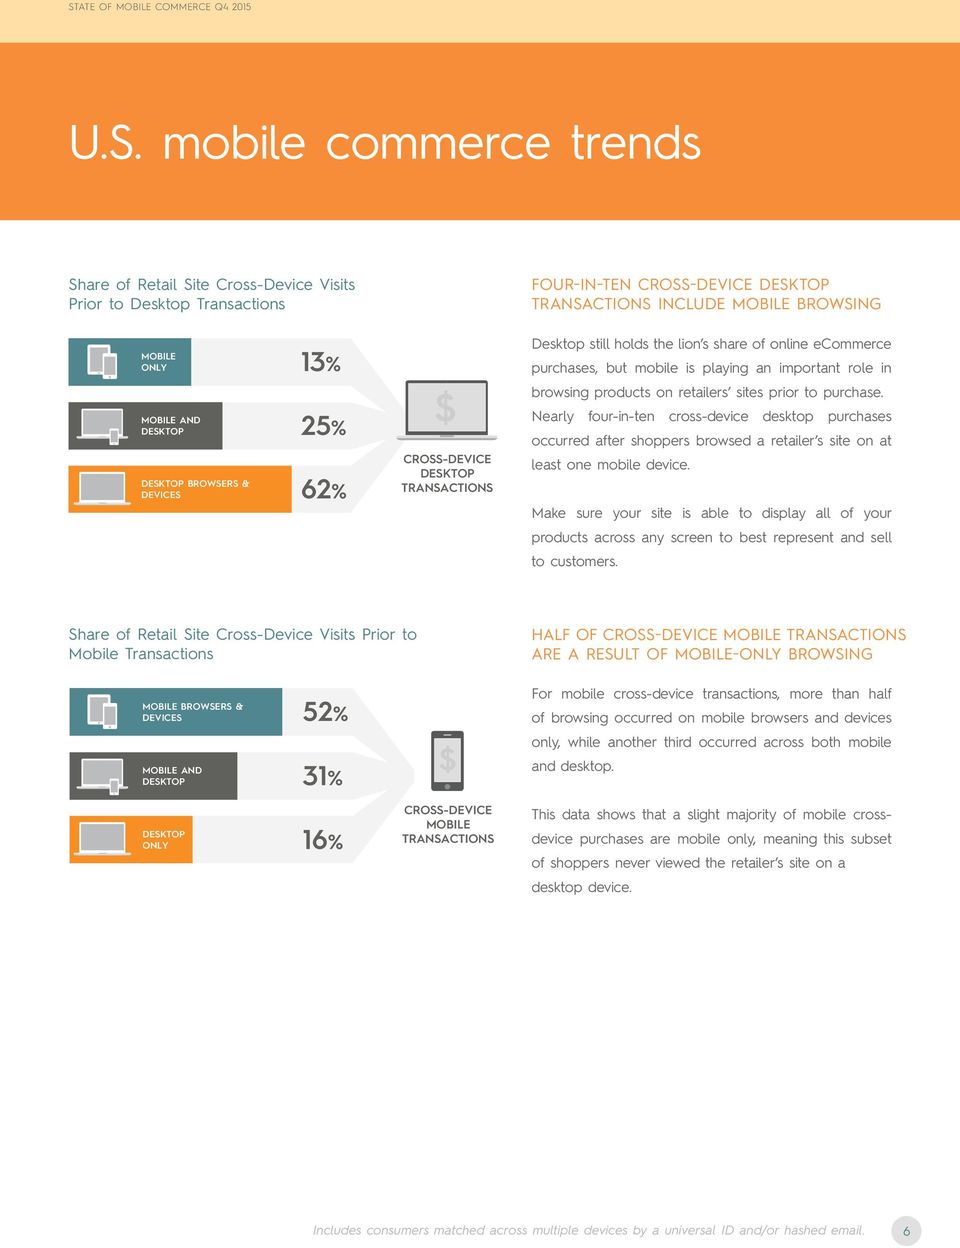 MOBILE AND BROWSERS & DEVICES 25% 62% CROSS-DEVICE TRANSACTIONS Nearly four-in-ten cross-device desktop purchases occurred after shoppers browsed a retailer s site on at least one mobile device.